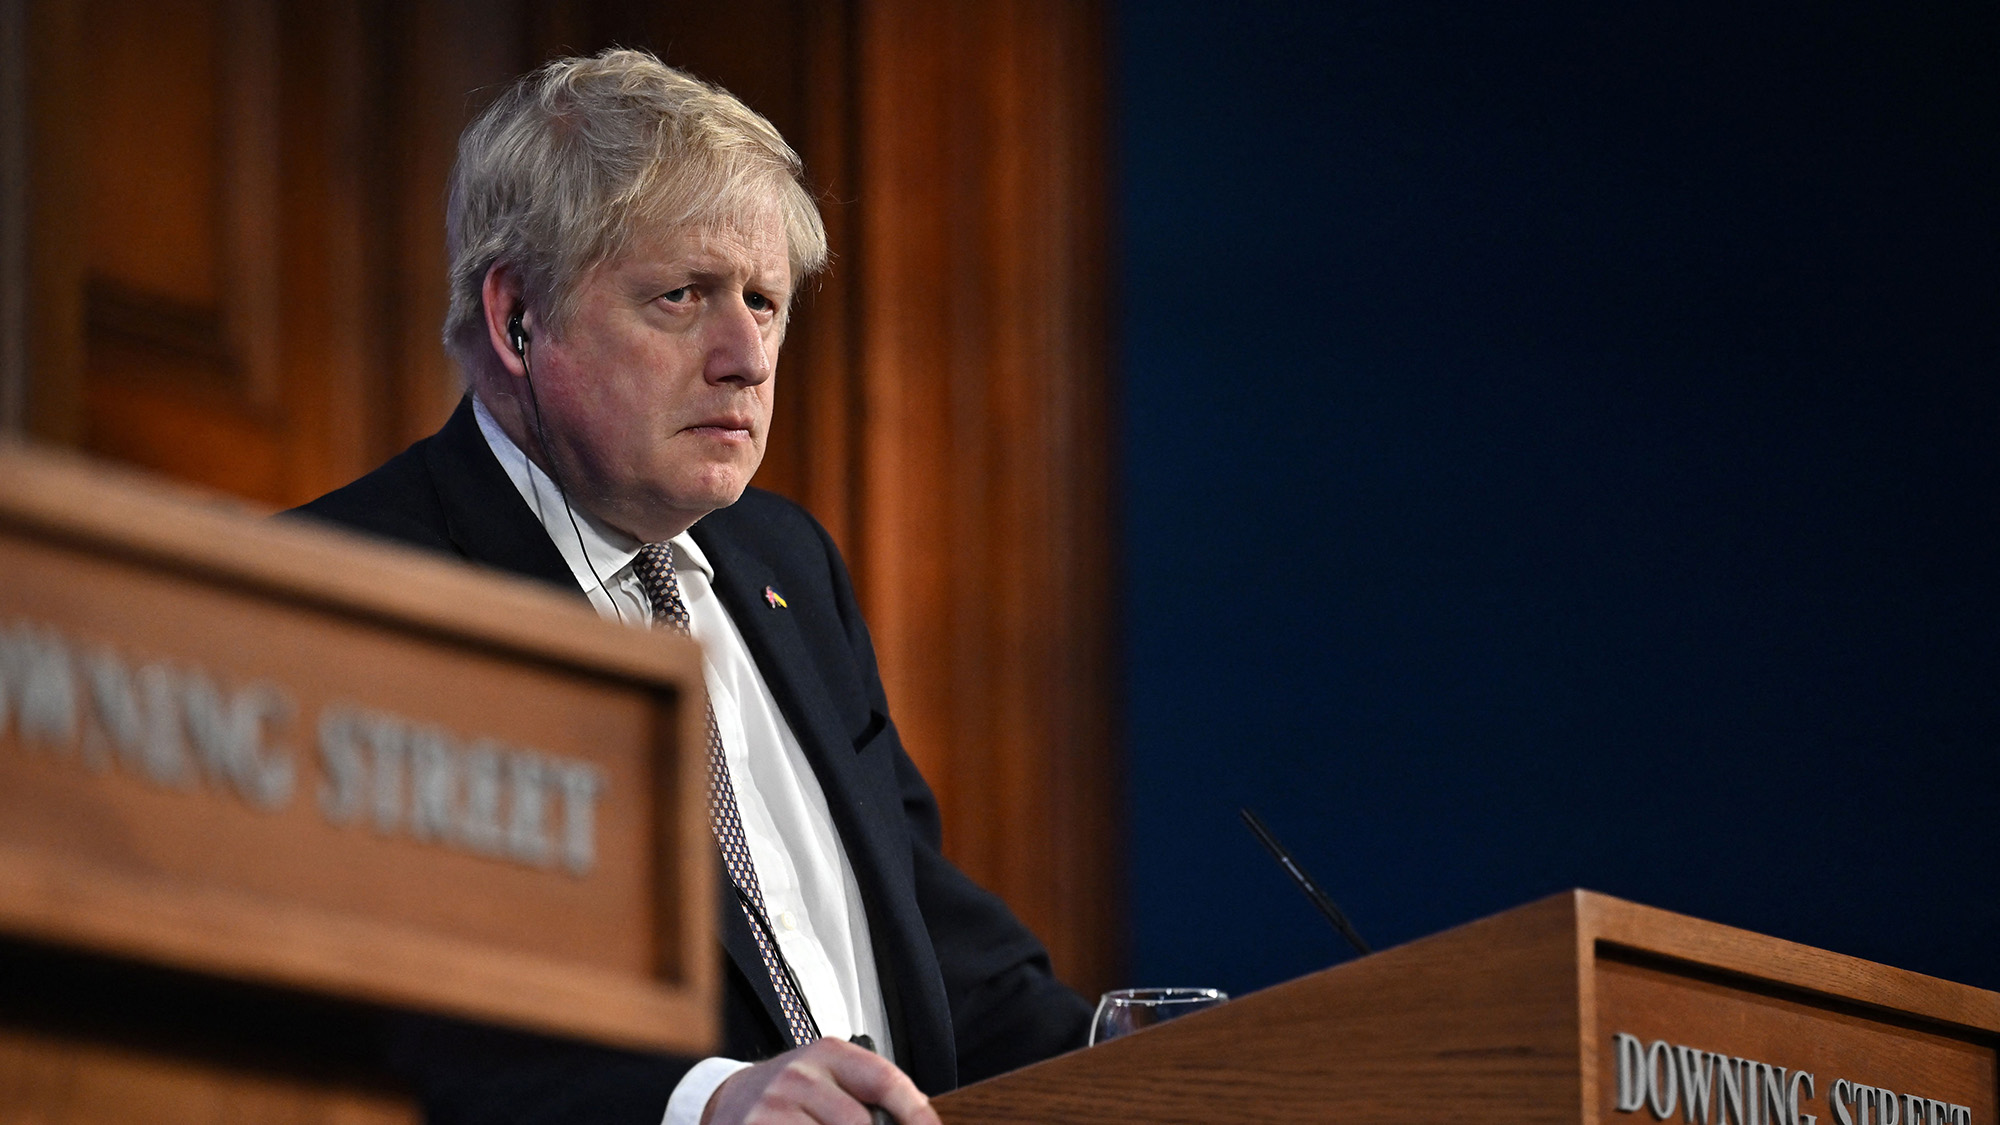 UK Prime Minister Boris Johnson speaks during a joint press conference with Germany's Chancellor Olaf Scholz following a bilateral meeting at 10 Downing Street, in London, on April 8.